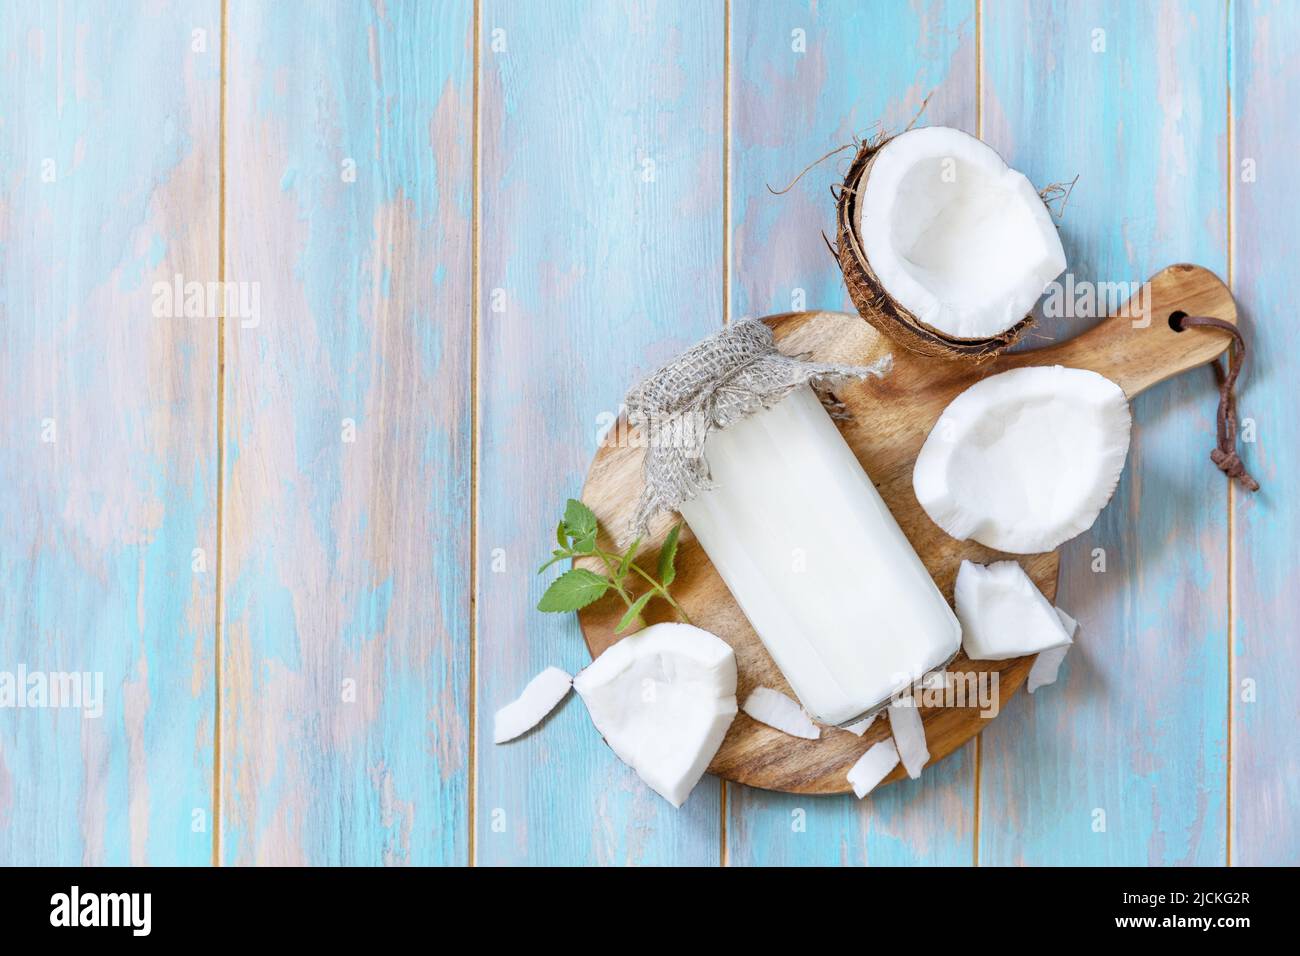 Vegan non dairy alternative milk, health content. Organic coconut milk in a bottle on a rustic table. View from above. Copy space. Stock Photo